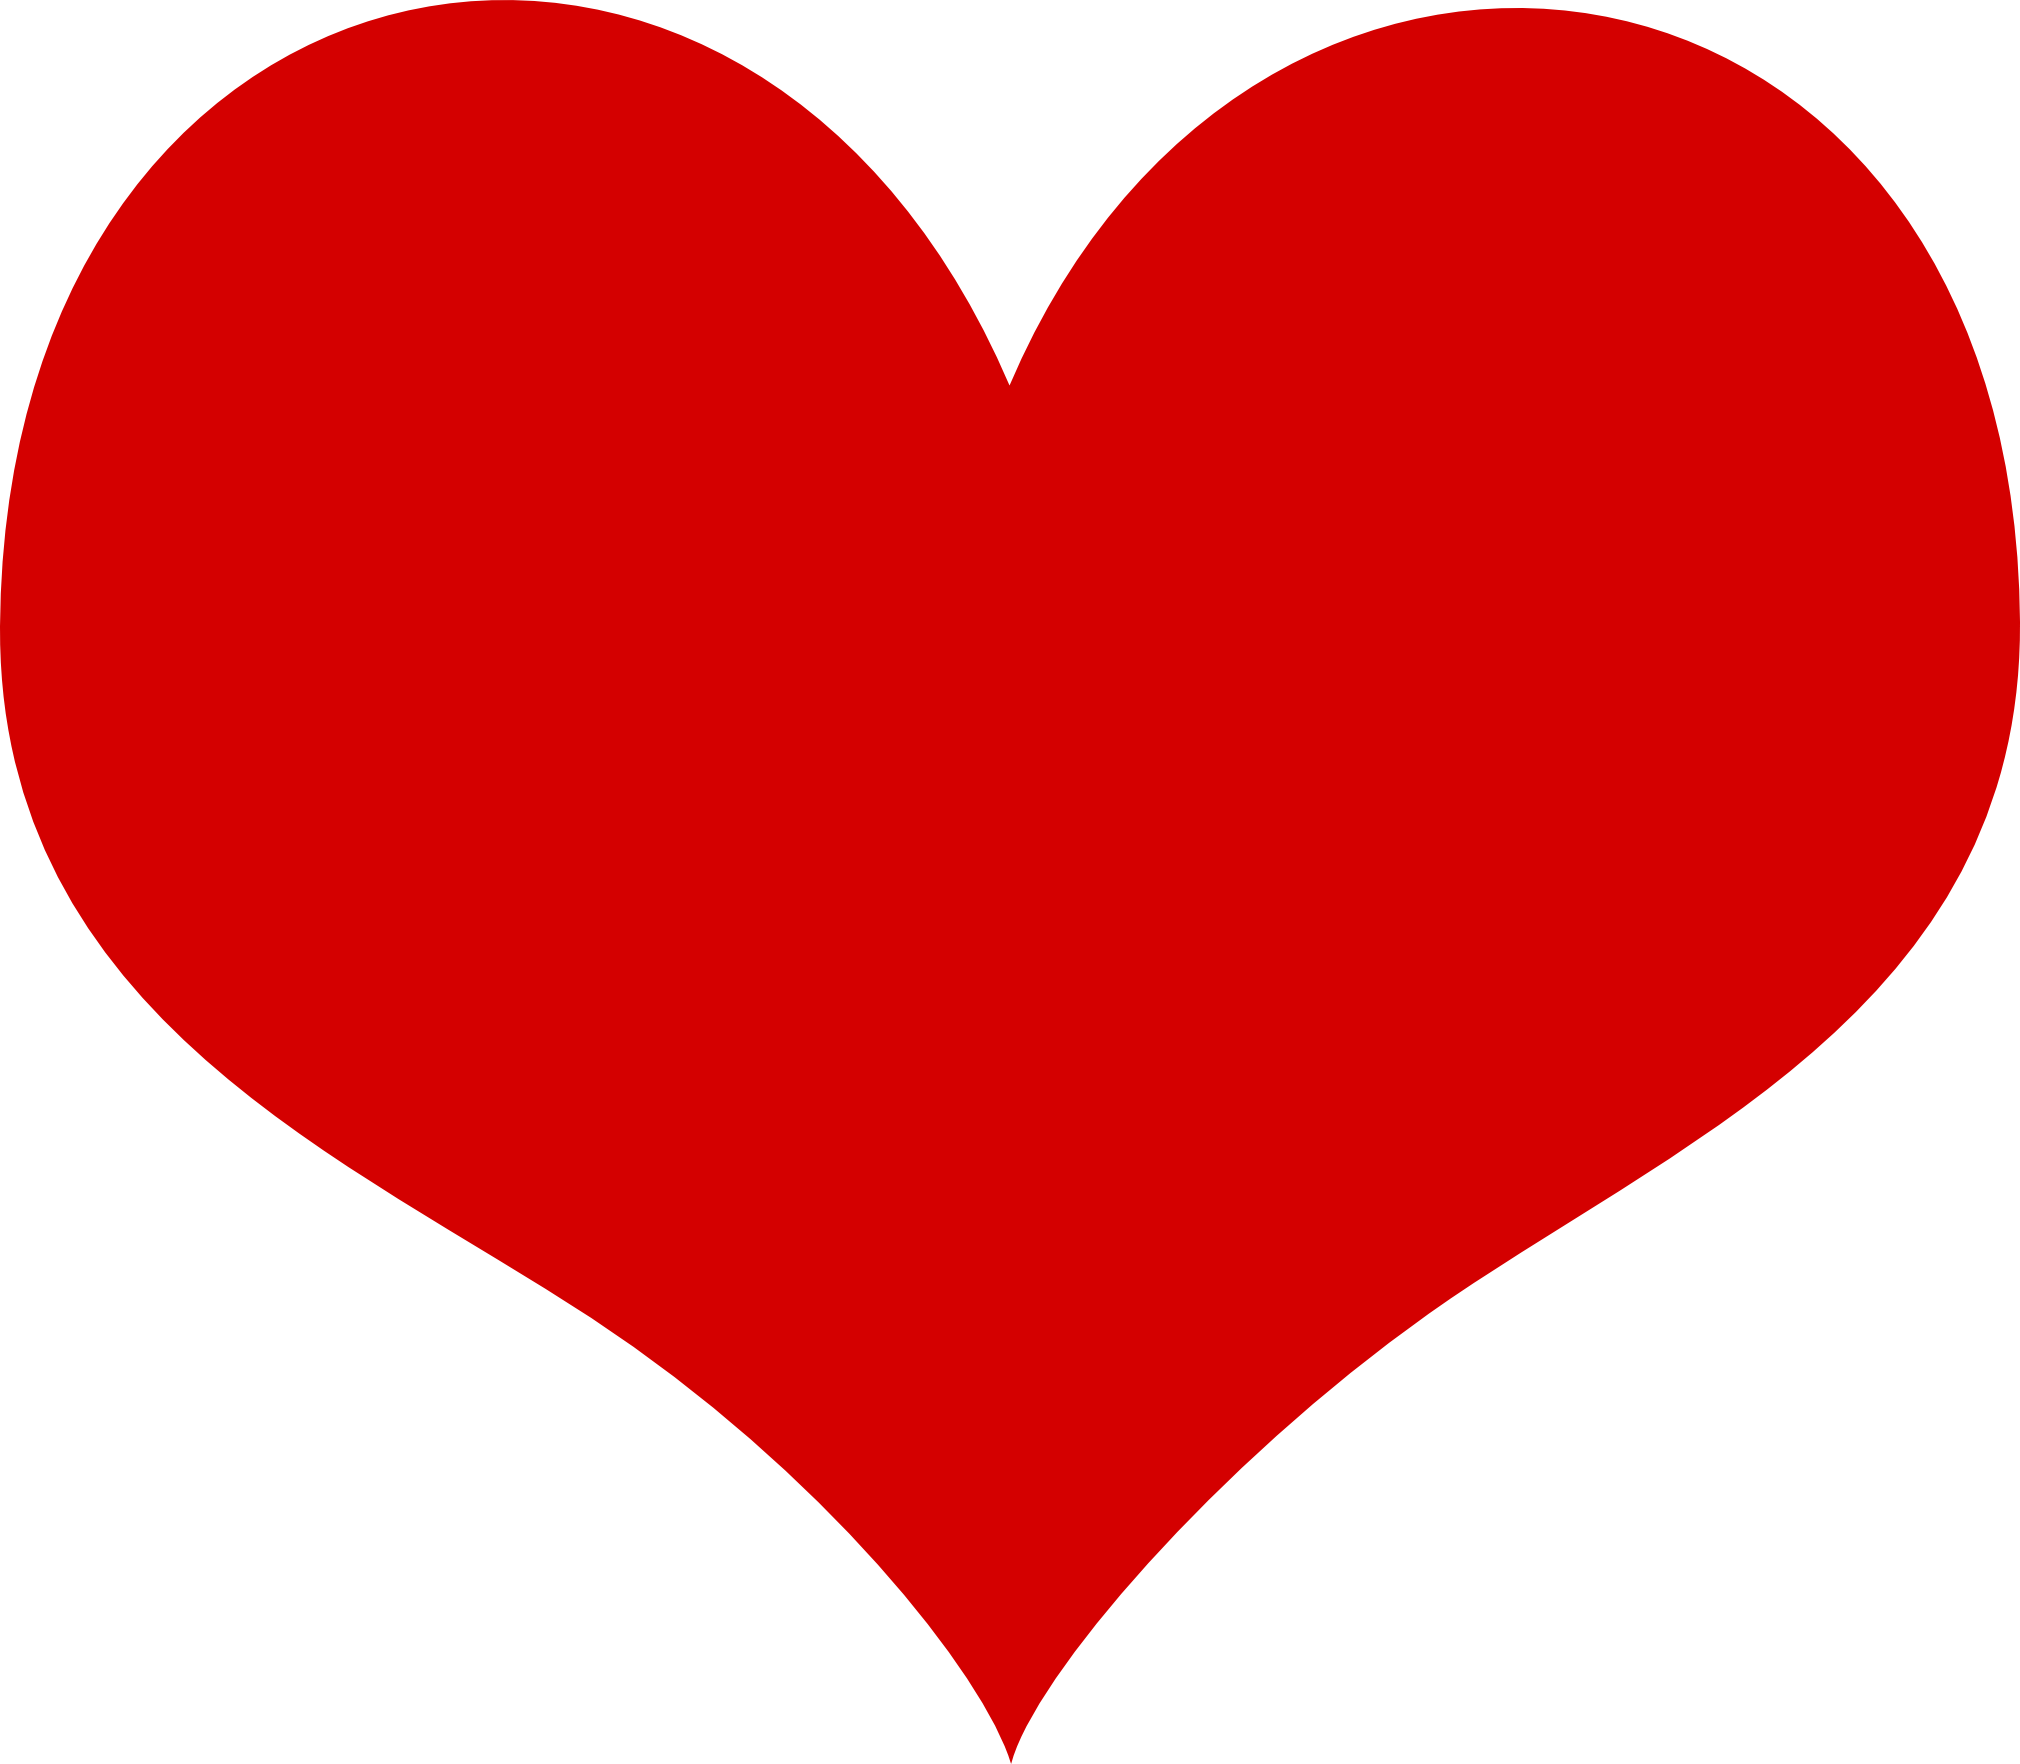 Clipart Real Heart Heart Clipart Rtddeejt9 Png